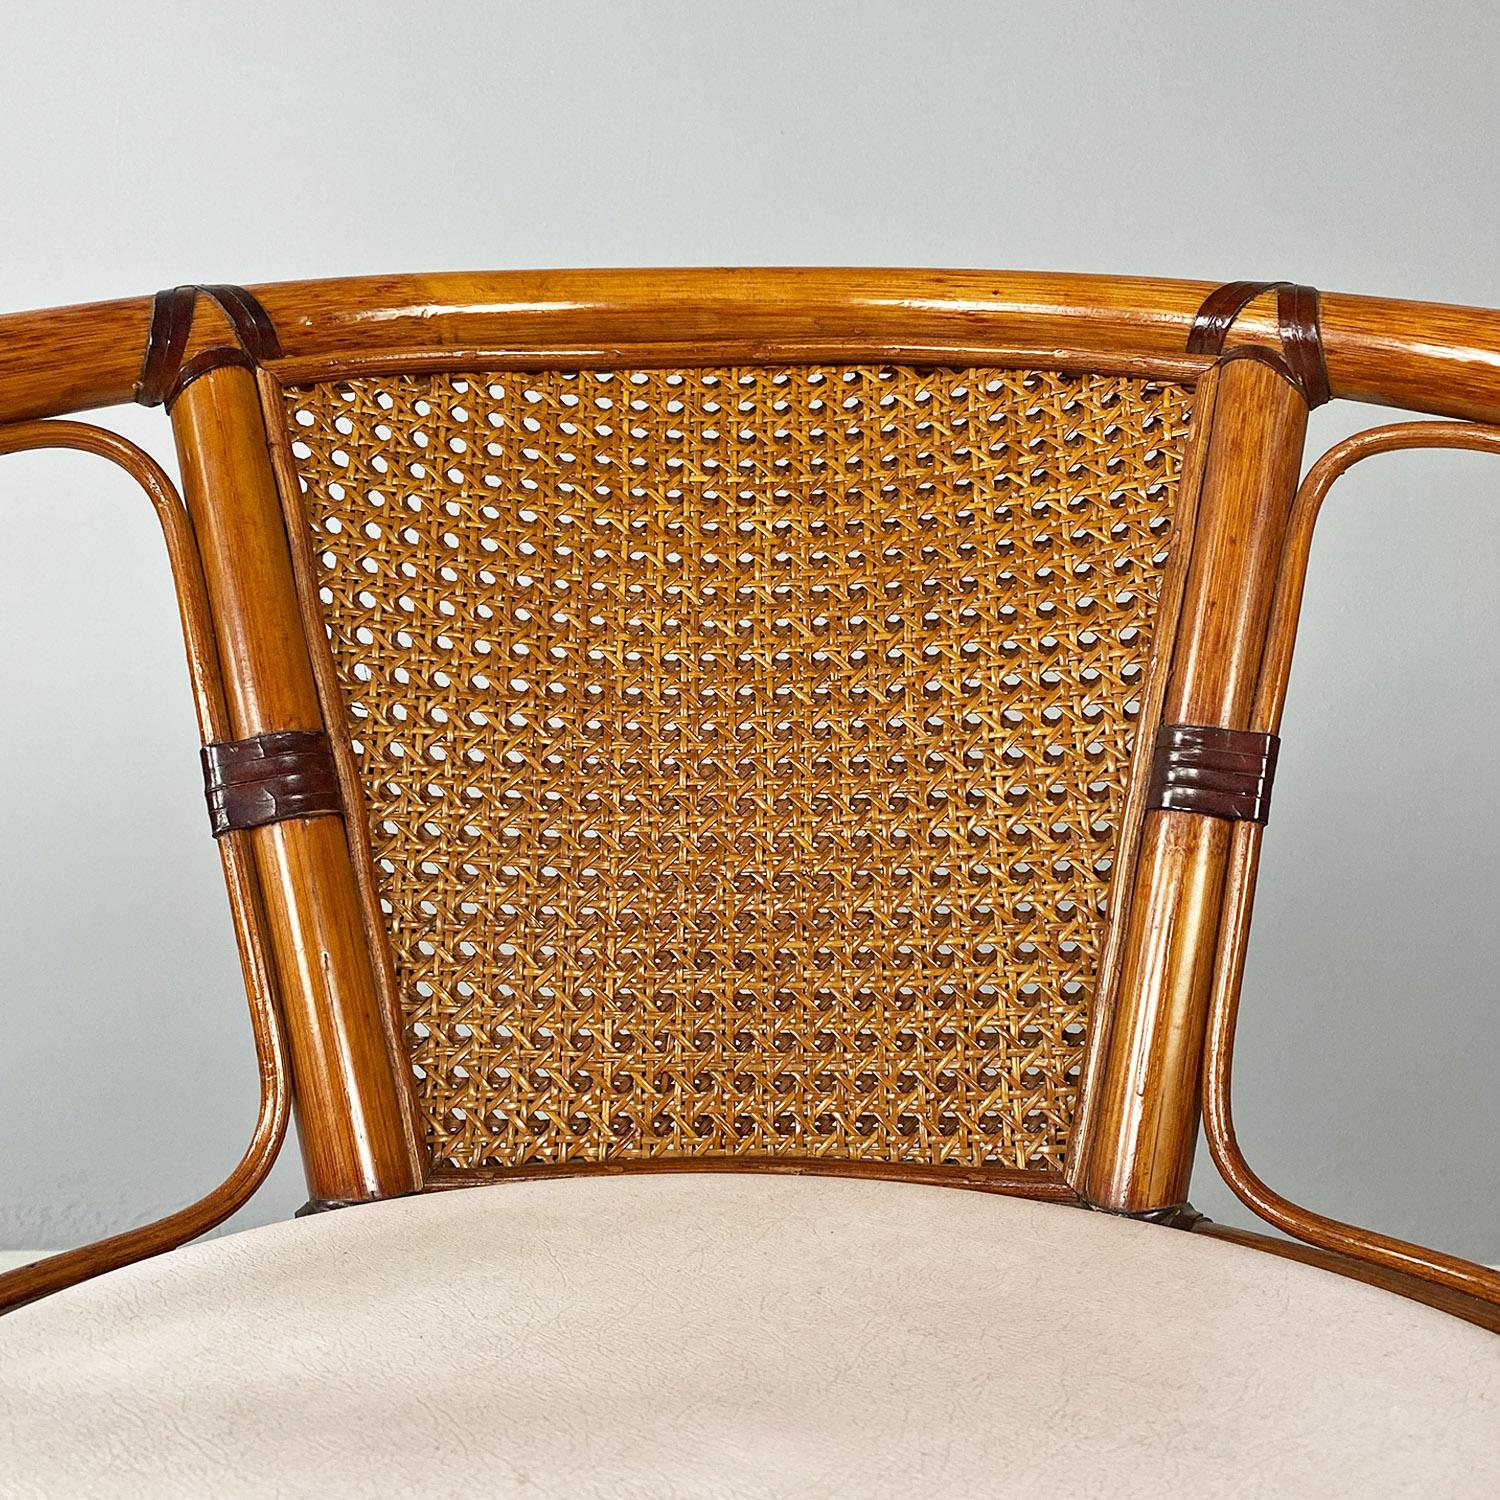 Cockpit chair, modern Italian, made of vienna straw wood and steel, ca 1970s For Sale 4